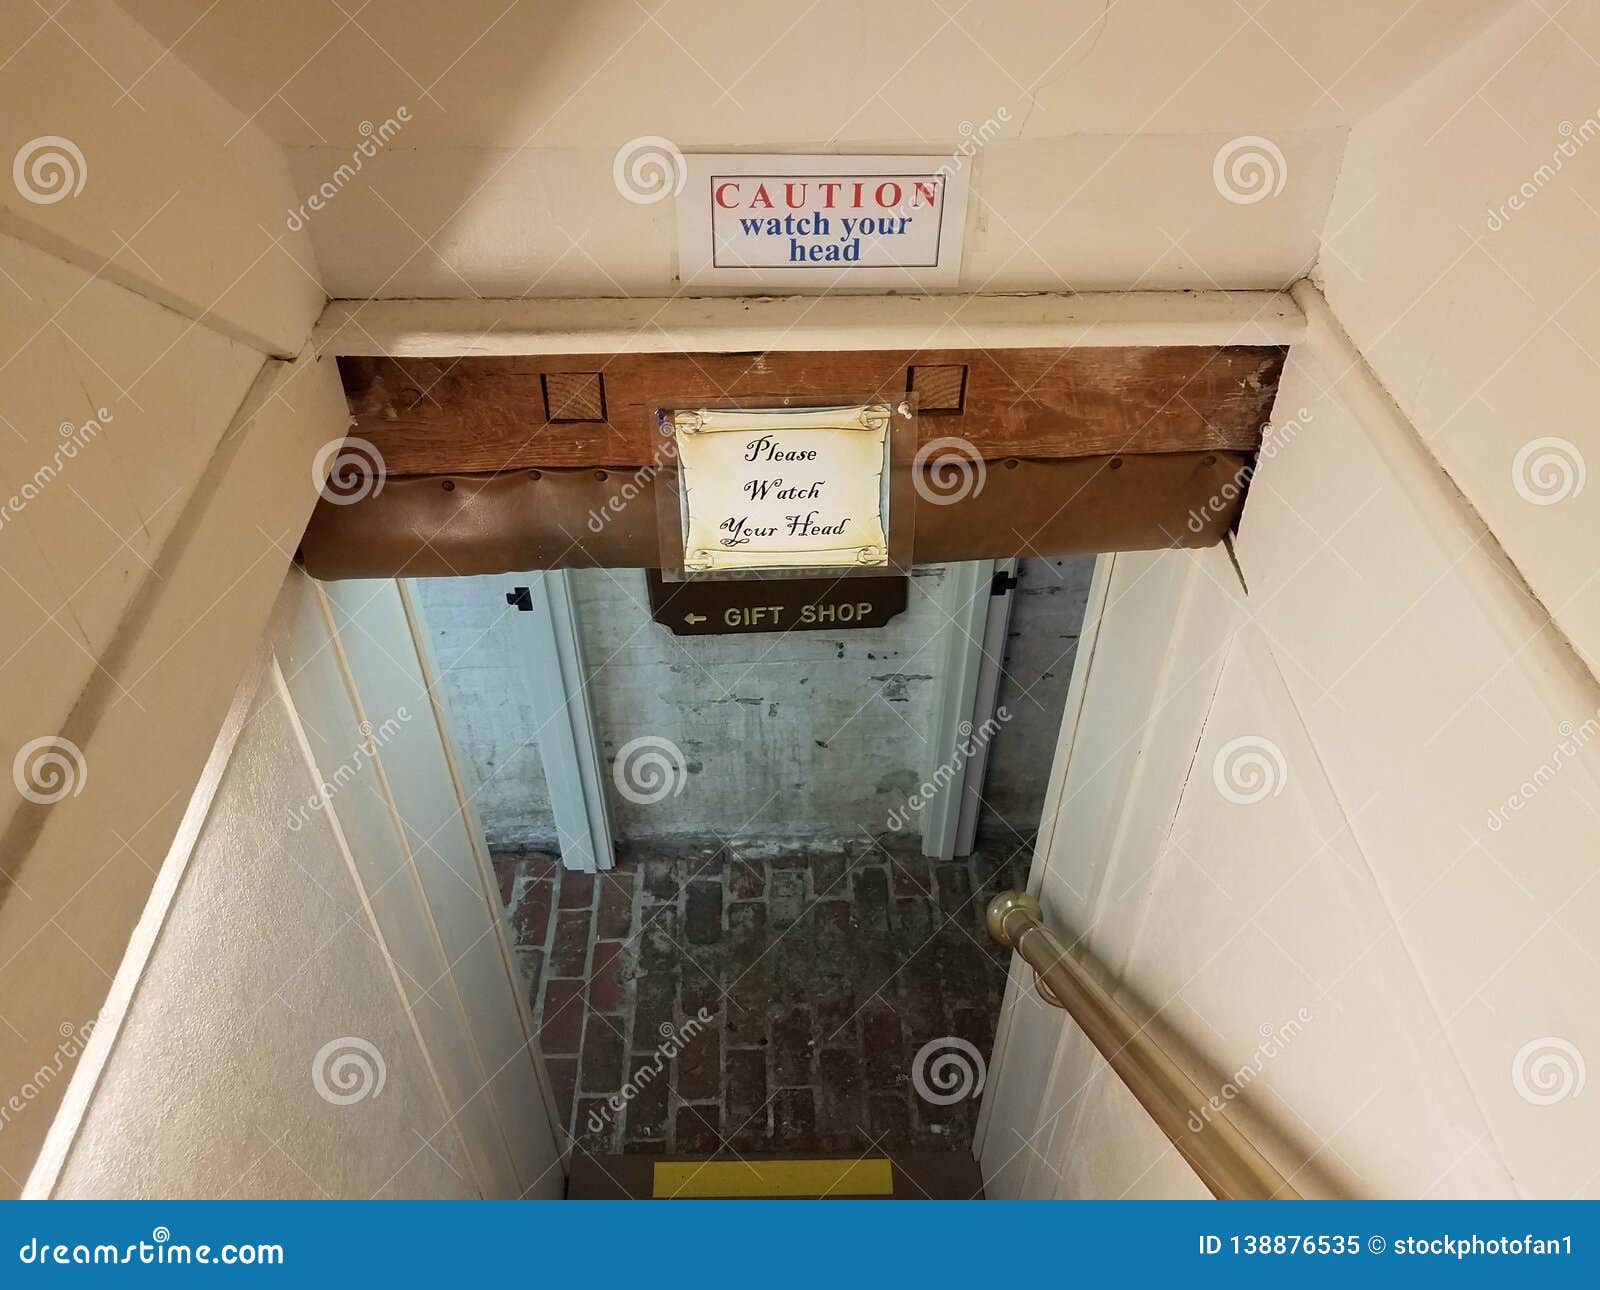 Caution Please Watch Your Head And Gift Shop Signs On Stairs Stock Image Image Of Please Head